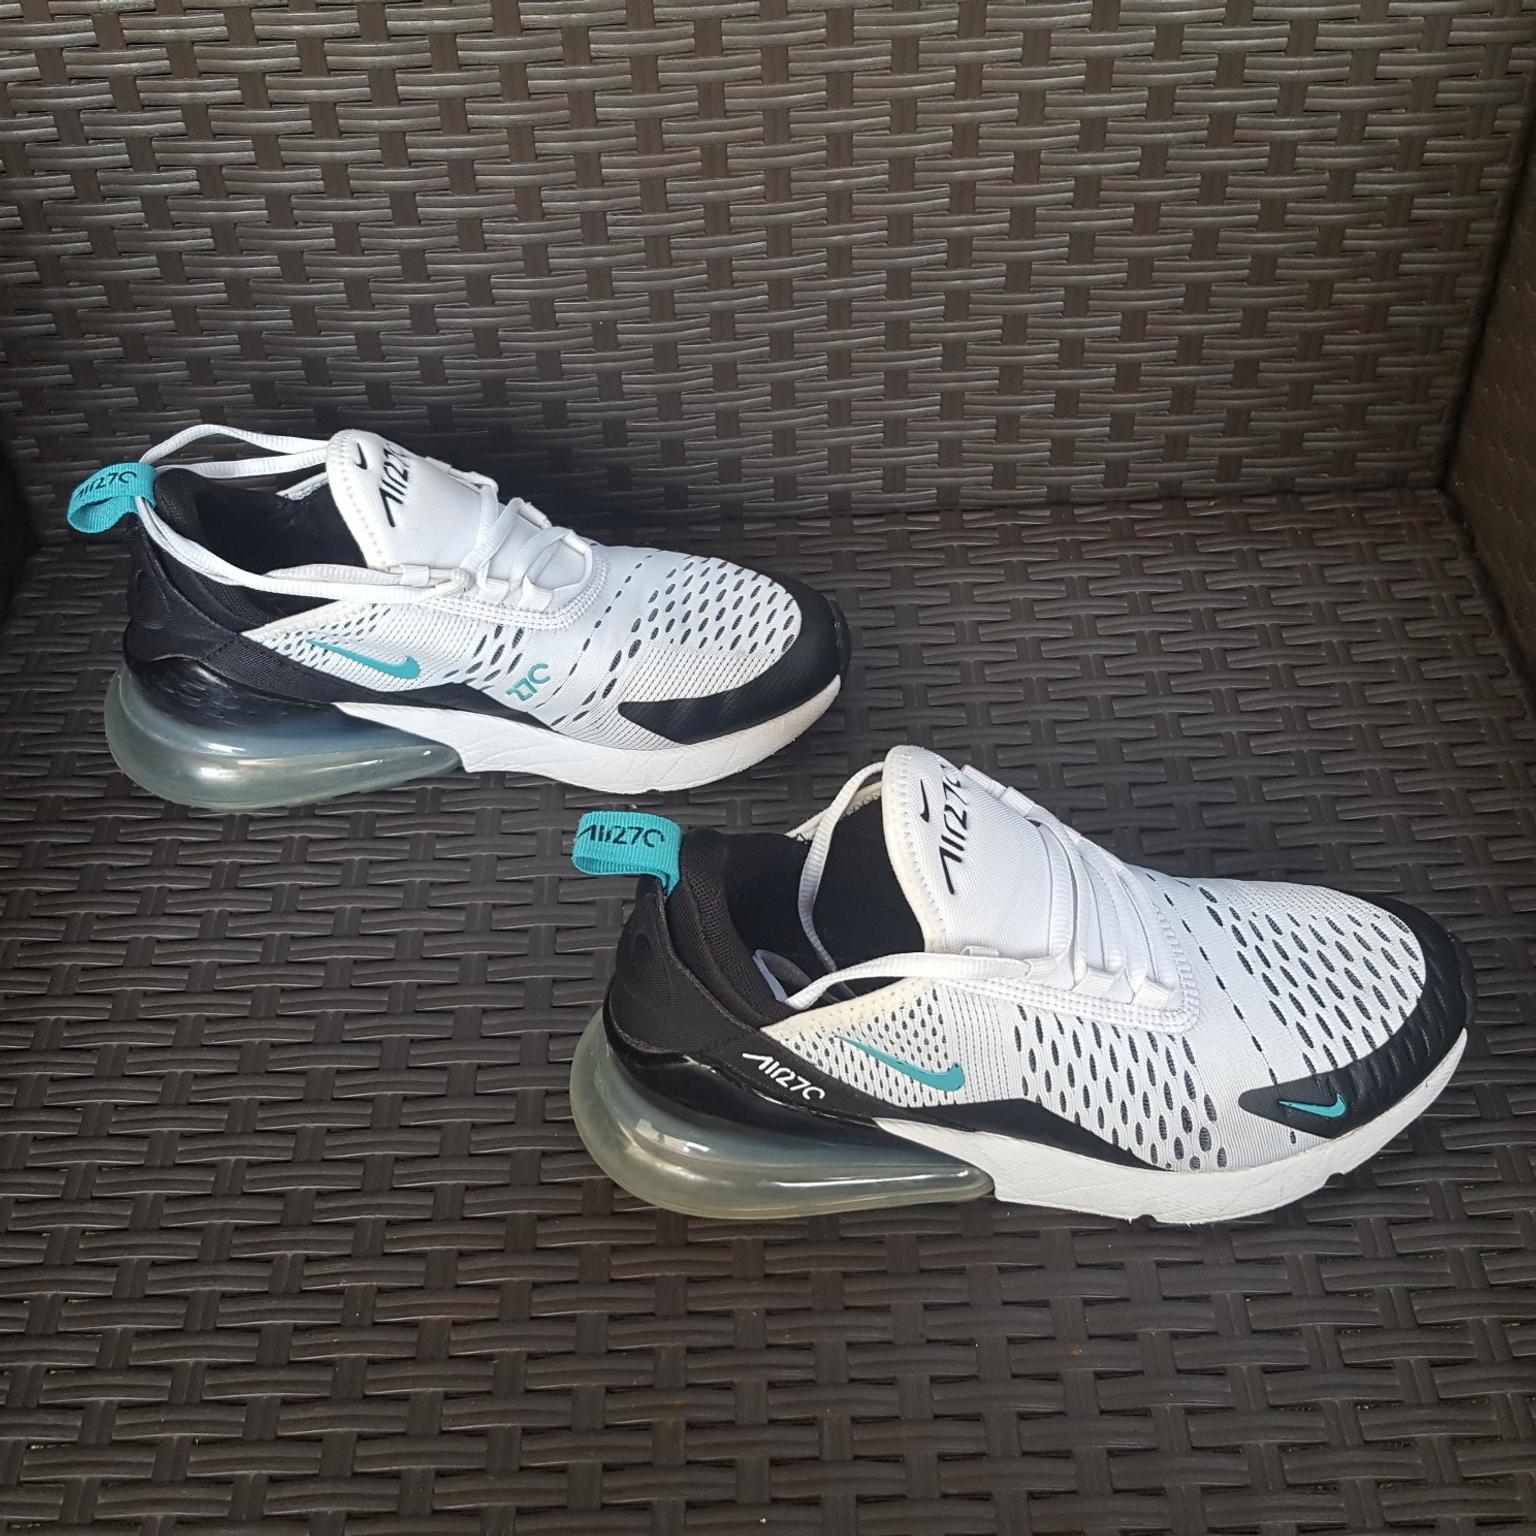 Scarpe NIKE AIR MAX 270 mis. 37,5 in 21100 Varese for €39.00 for sale |  Shpock